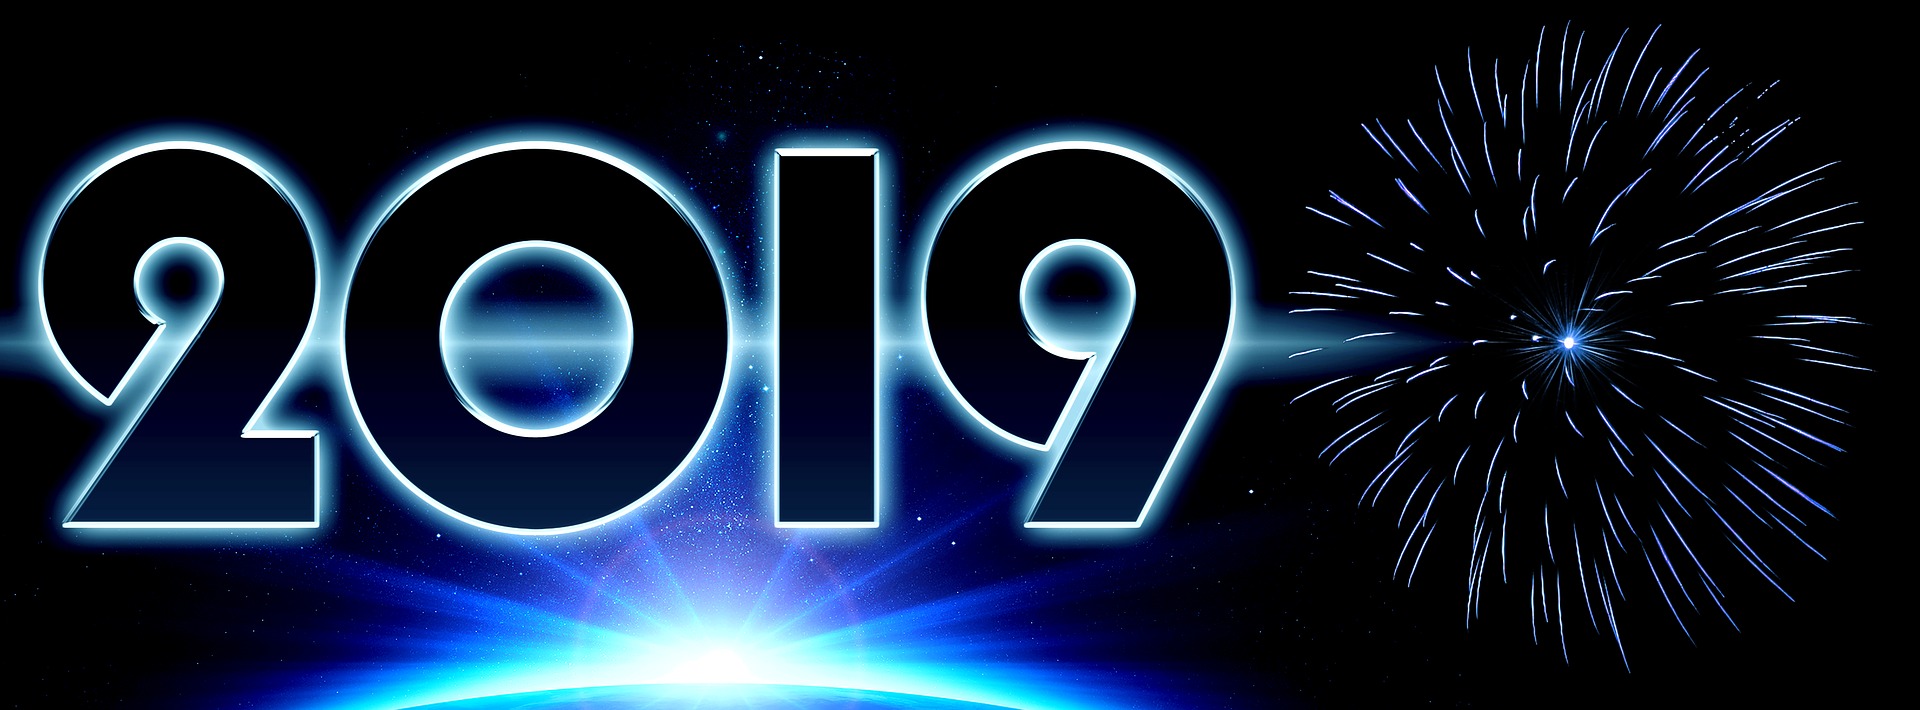 Featuring the year 2019